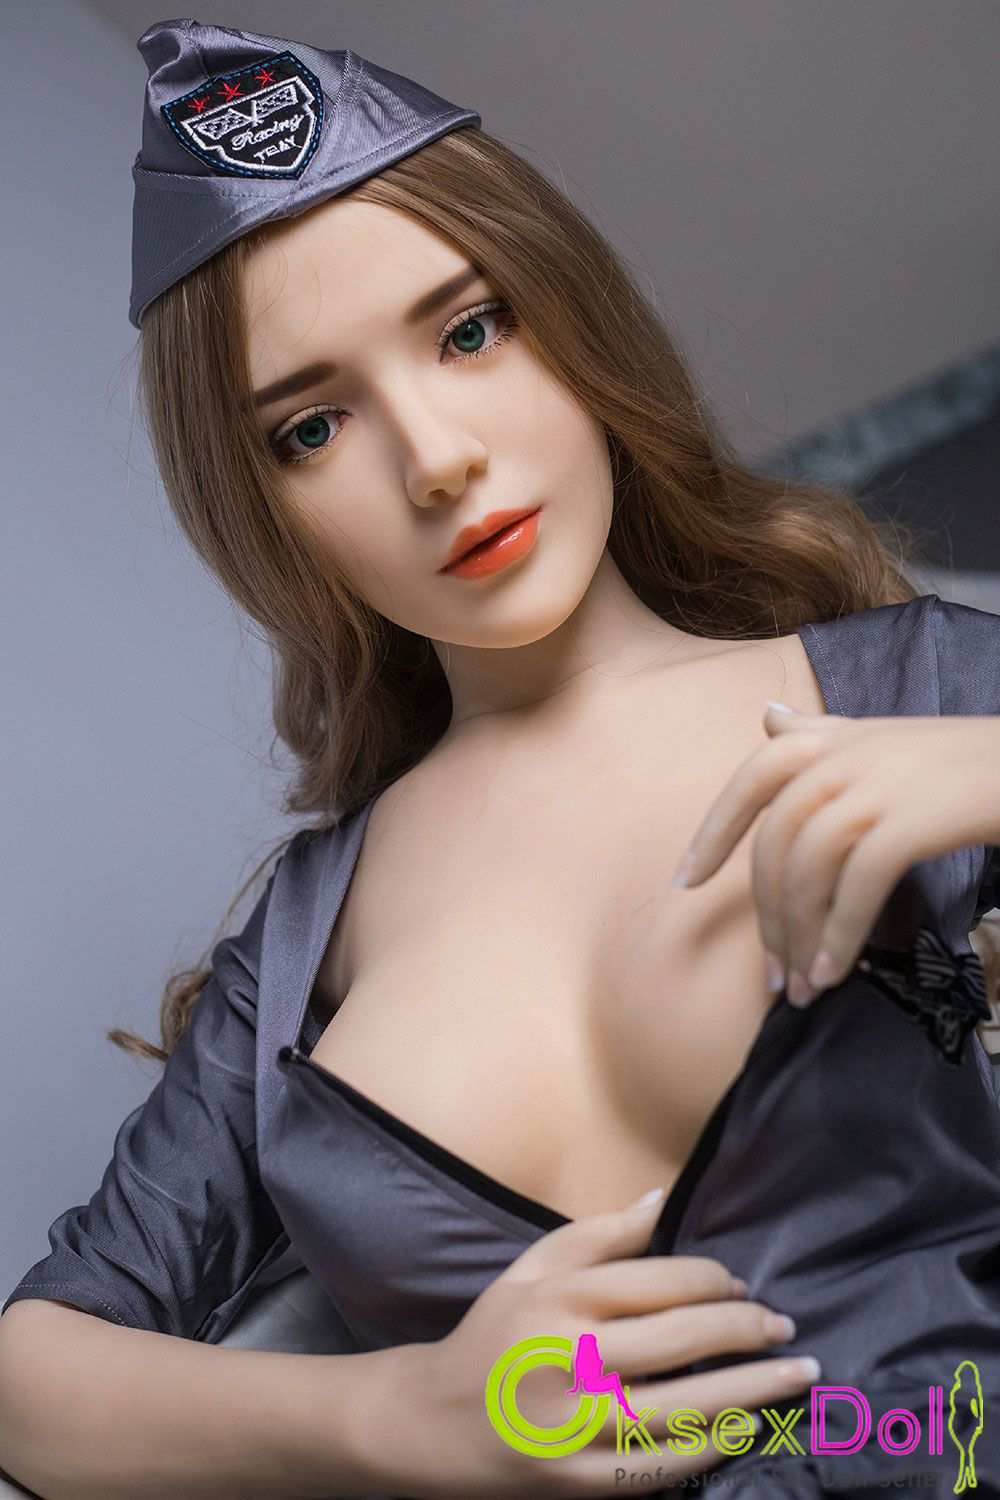 life size sex doll porn Gallery